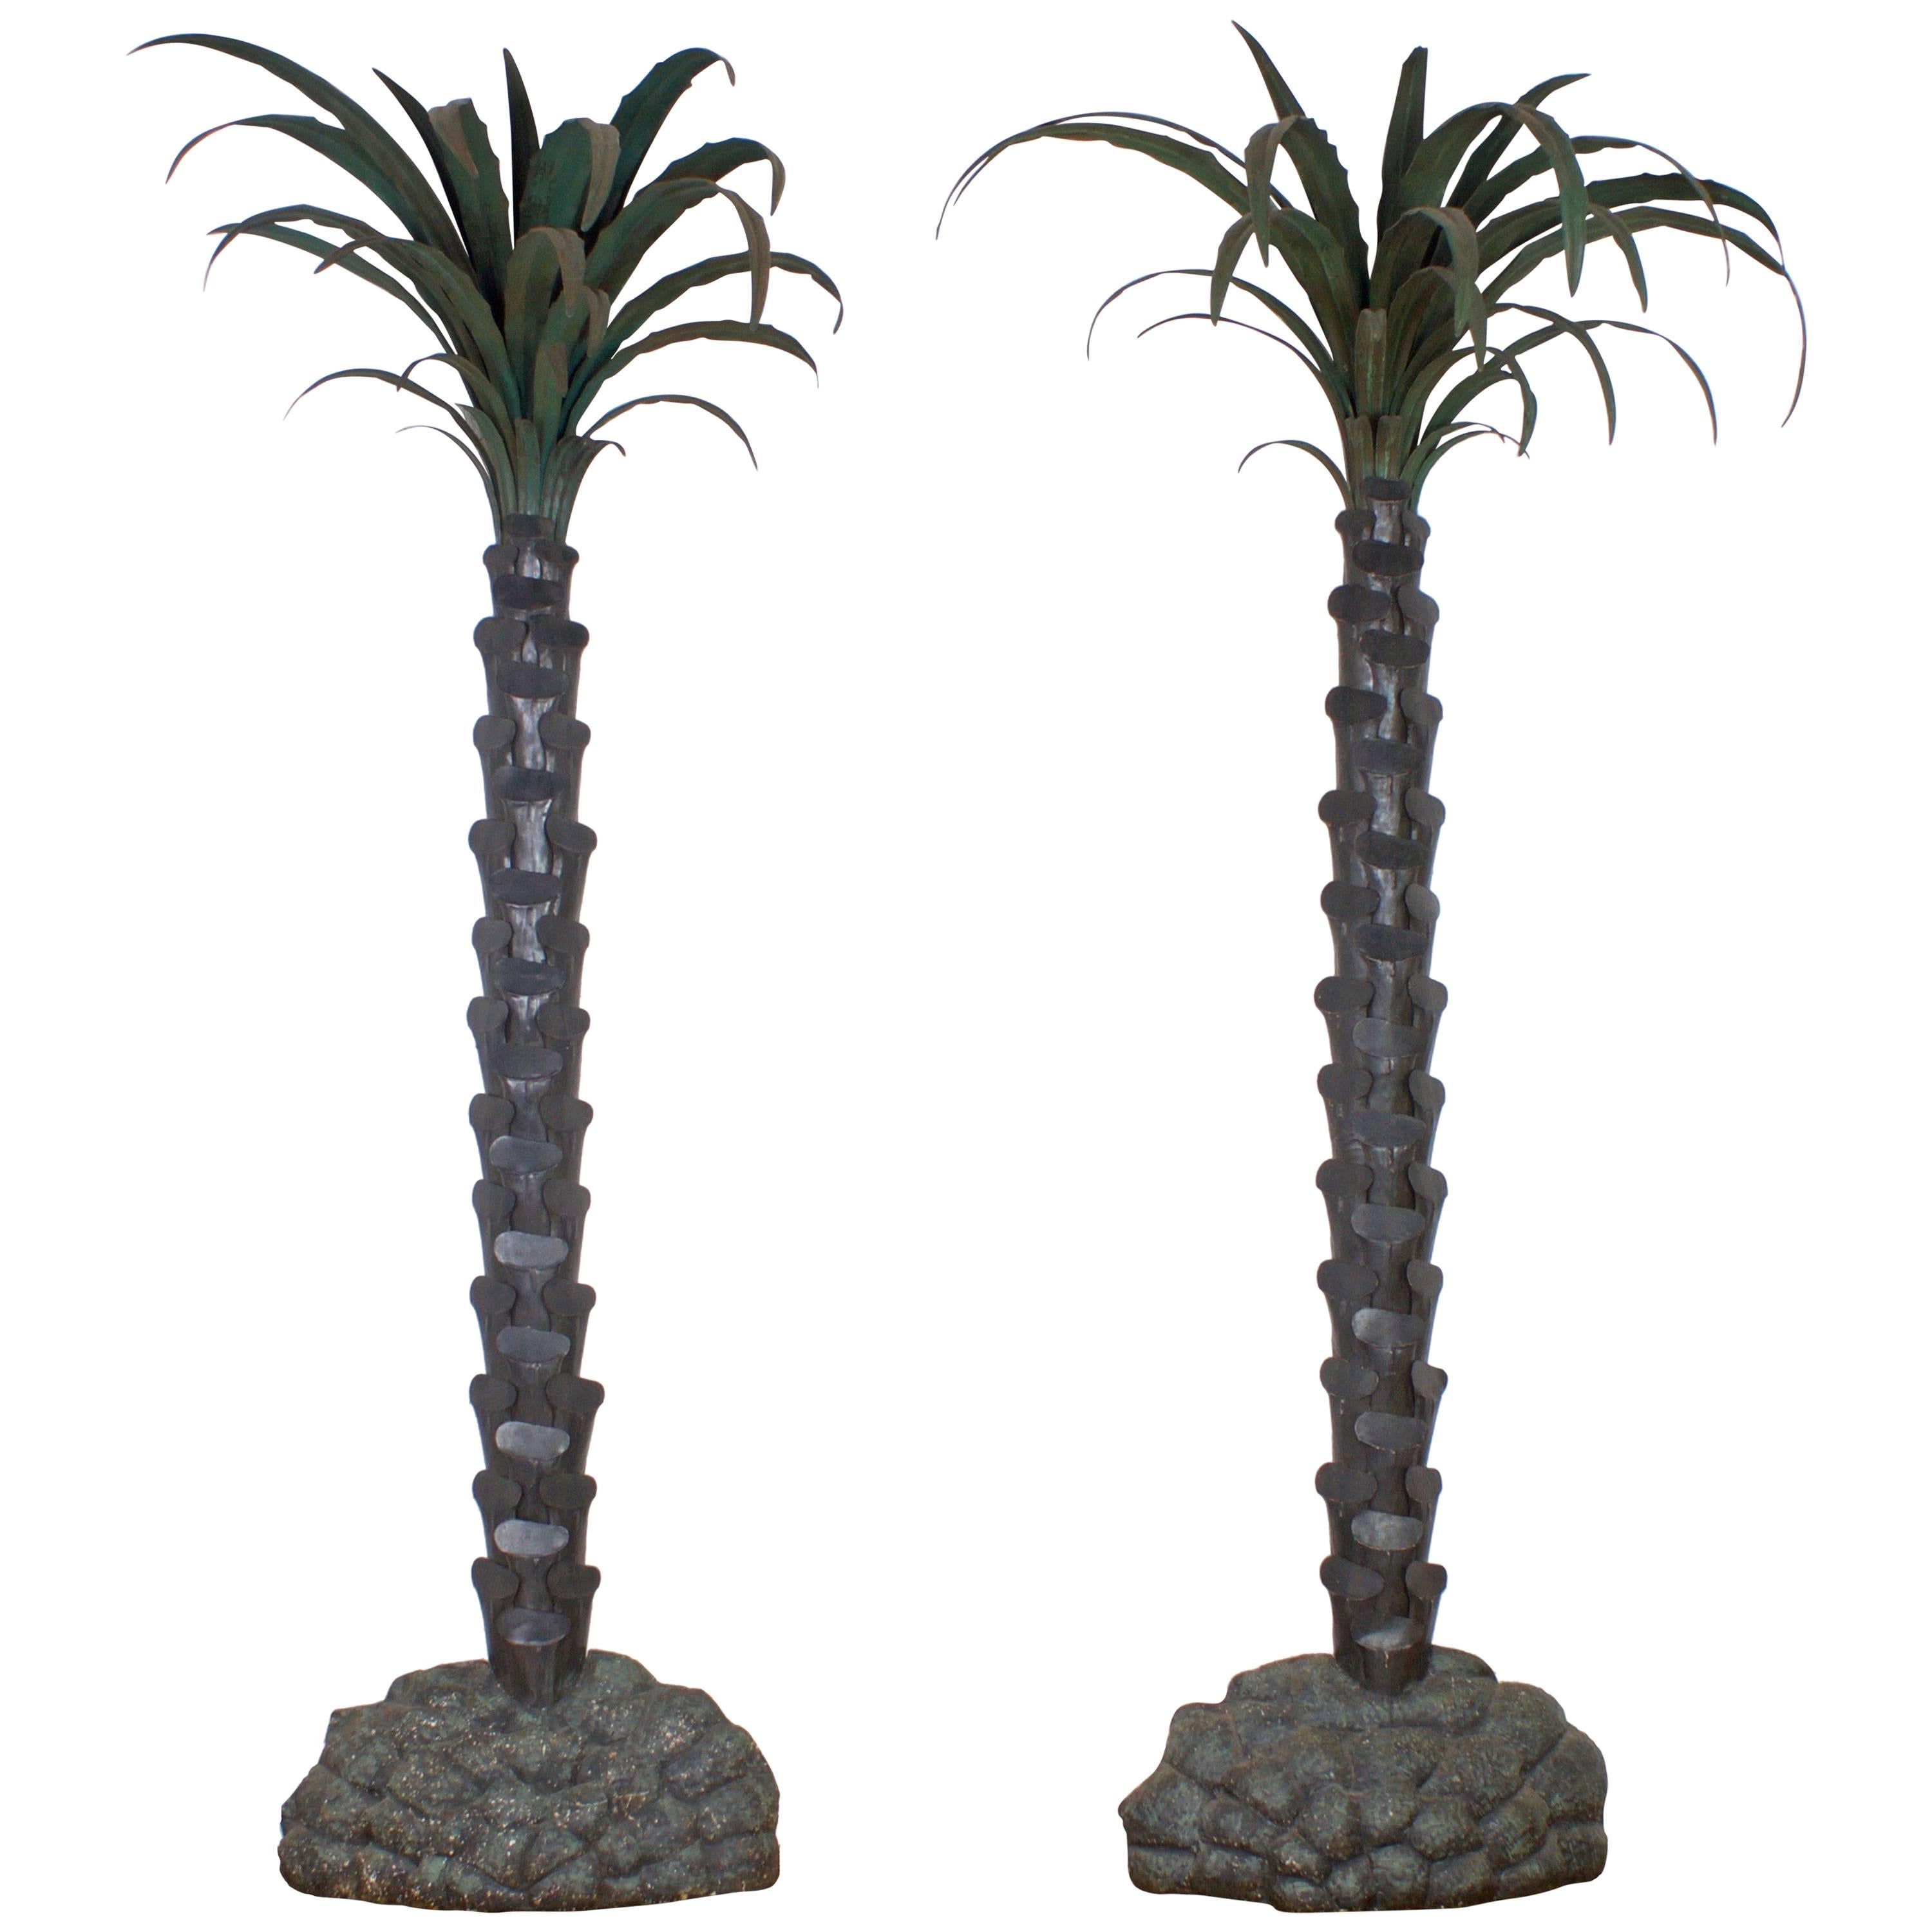 Pair of Exceptional Vintage Palm Trees in Original Finish